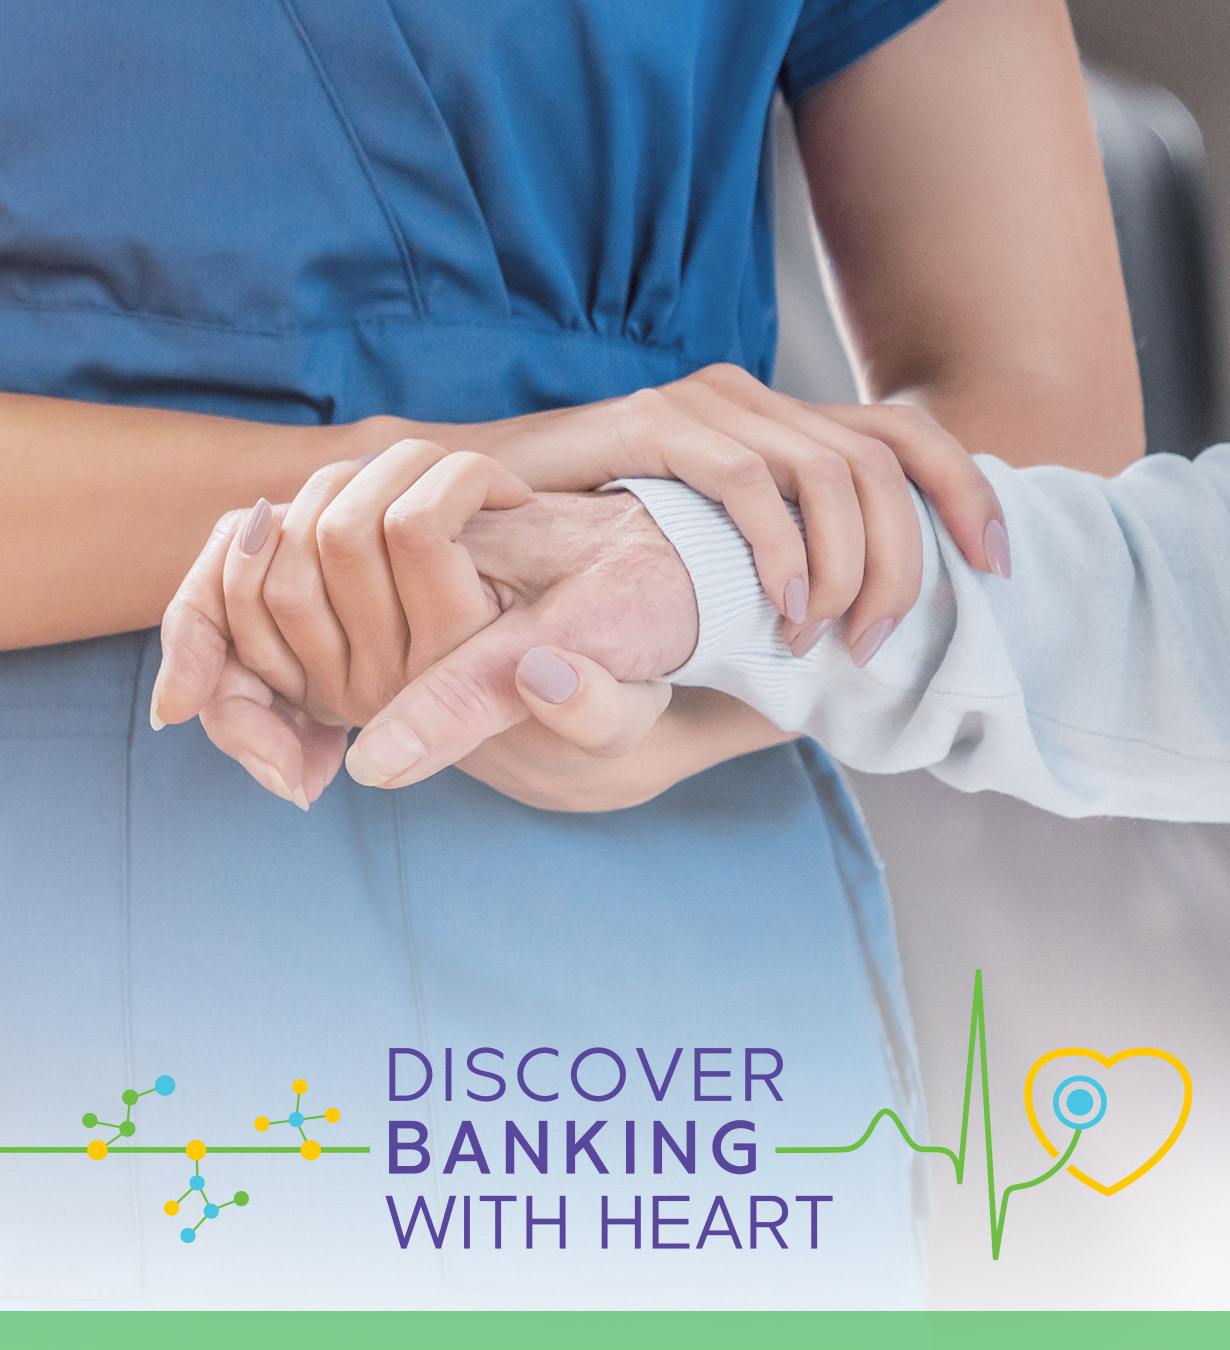 NIHFCU has developed solutions specifically designed for healthcare professionals and we are proud to offer them directly to the nursing community